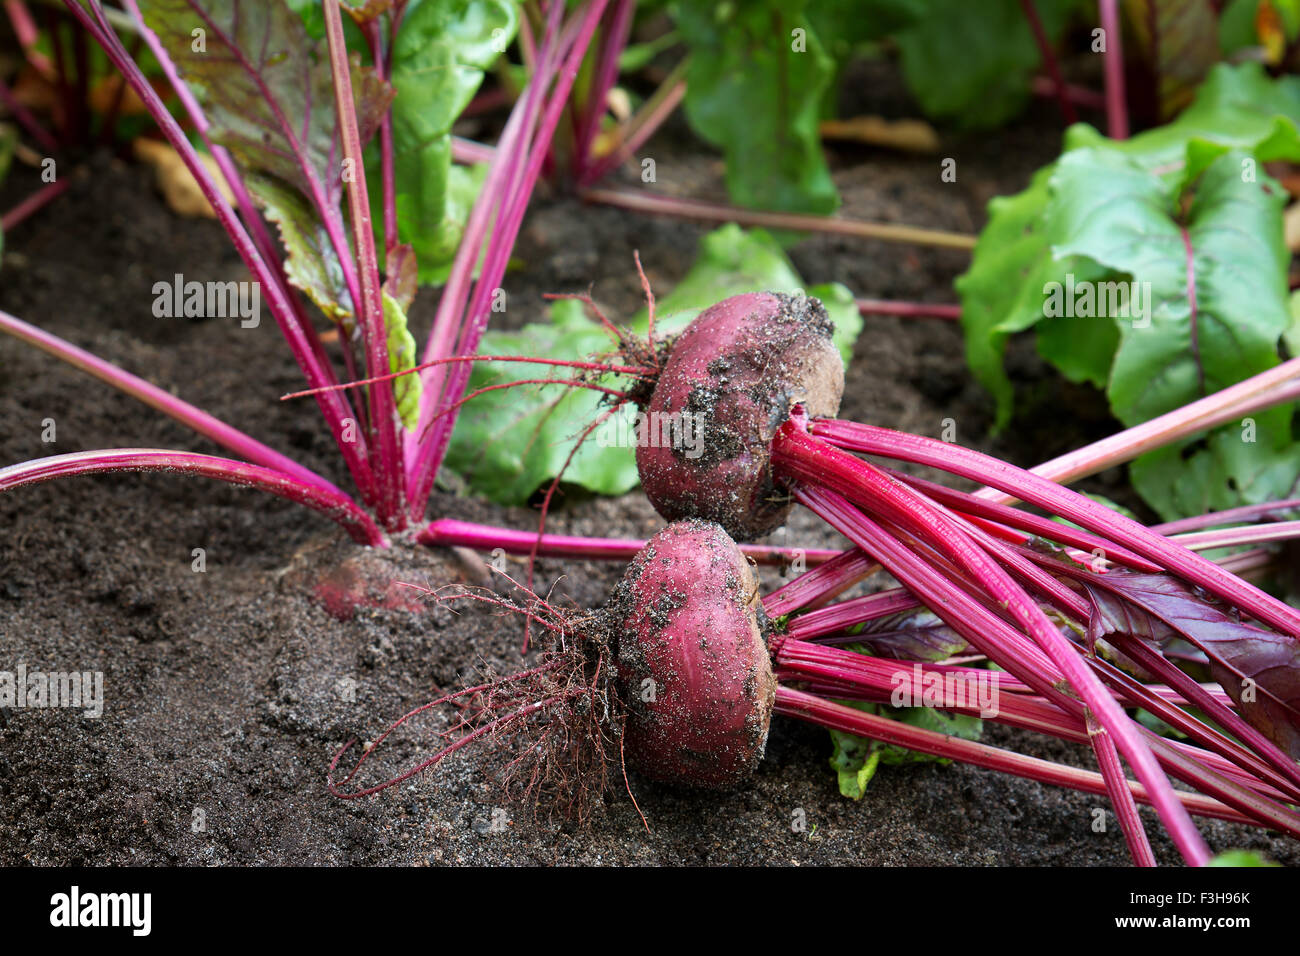 Beetroot in the ground Stock Photo